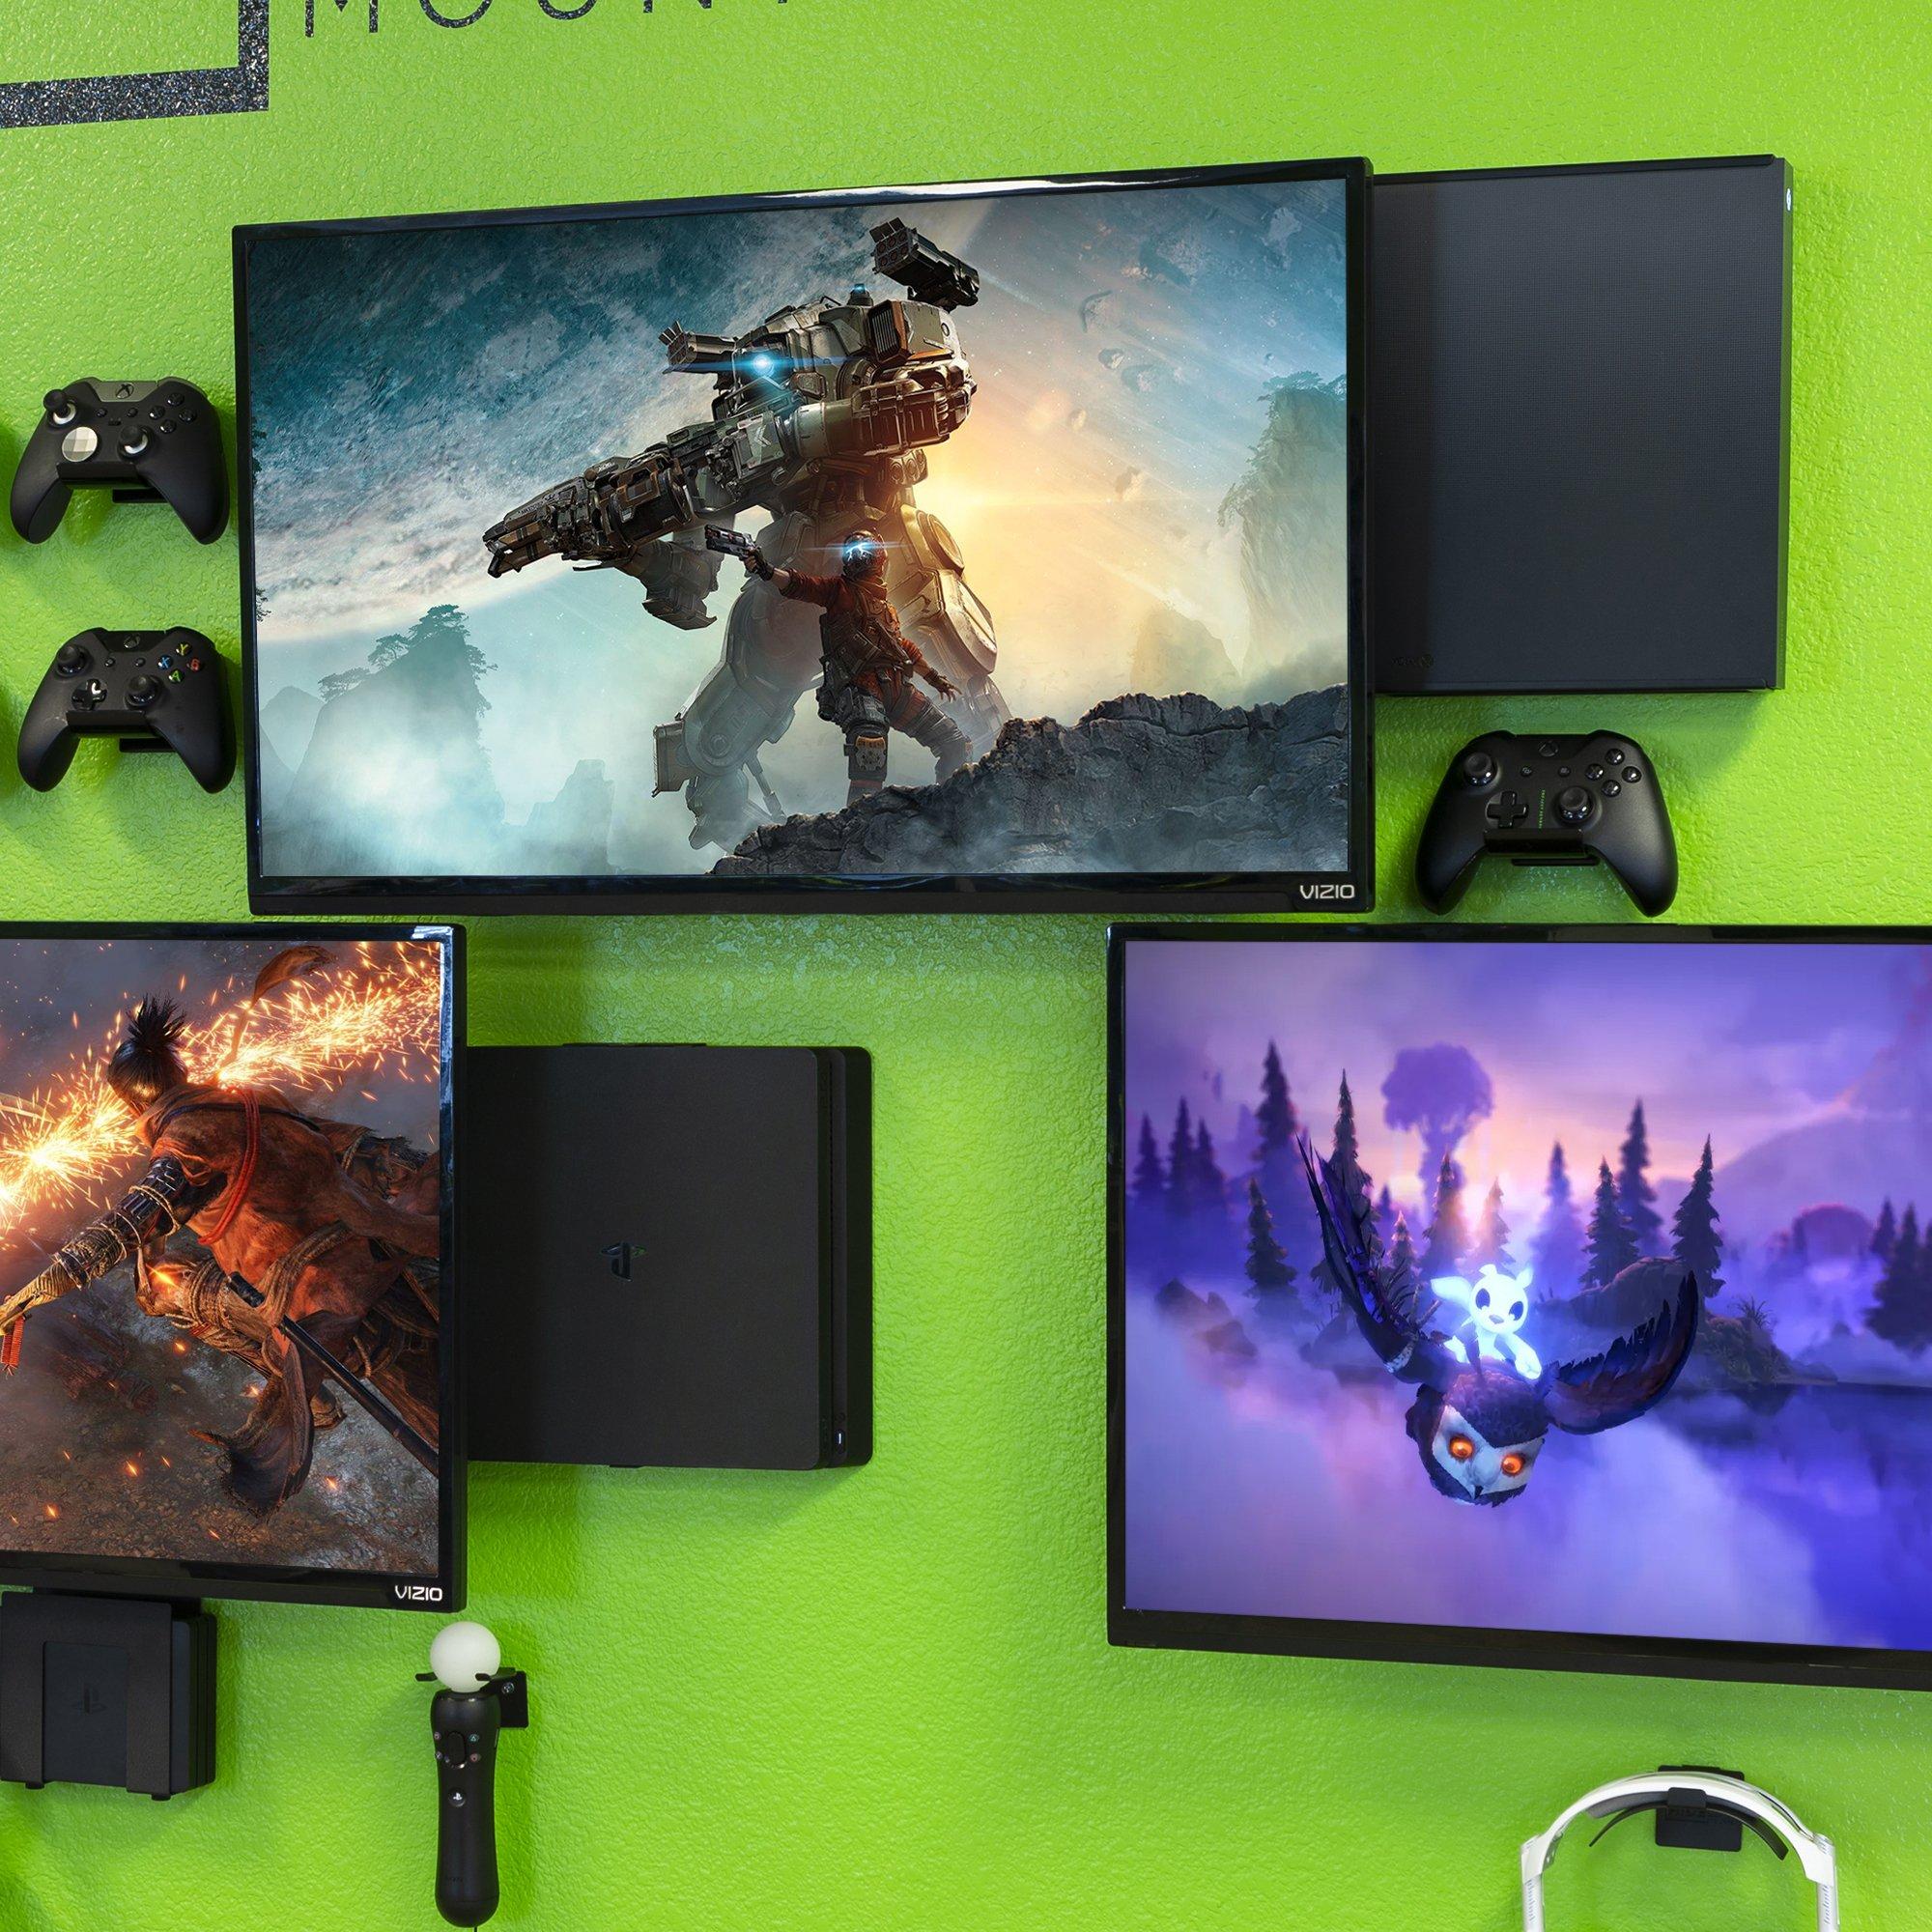 mounting xbox one on wall